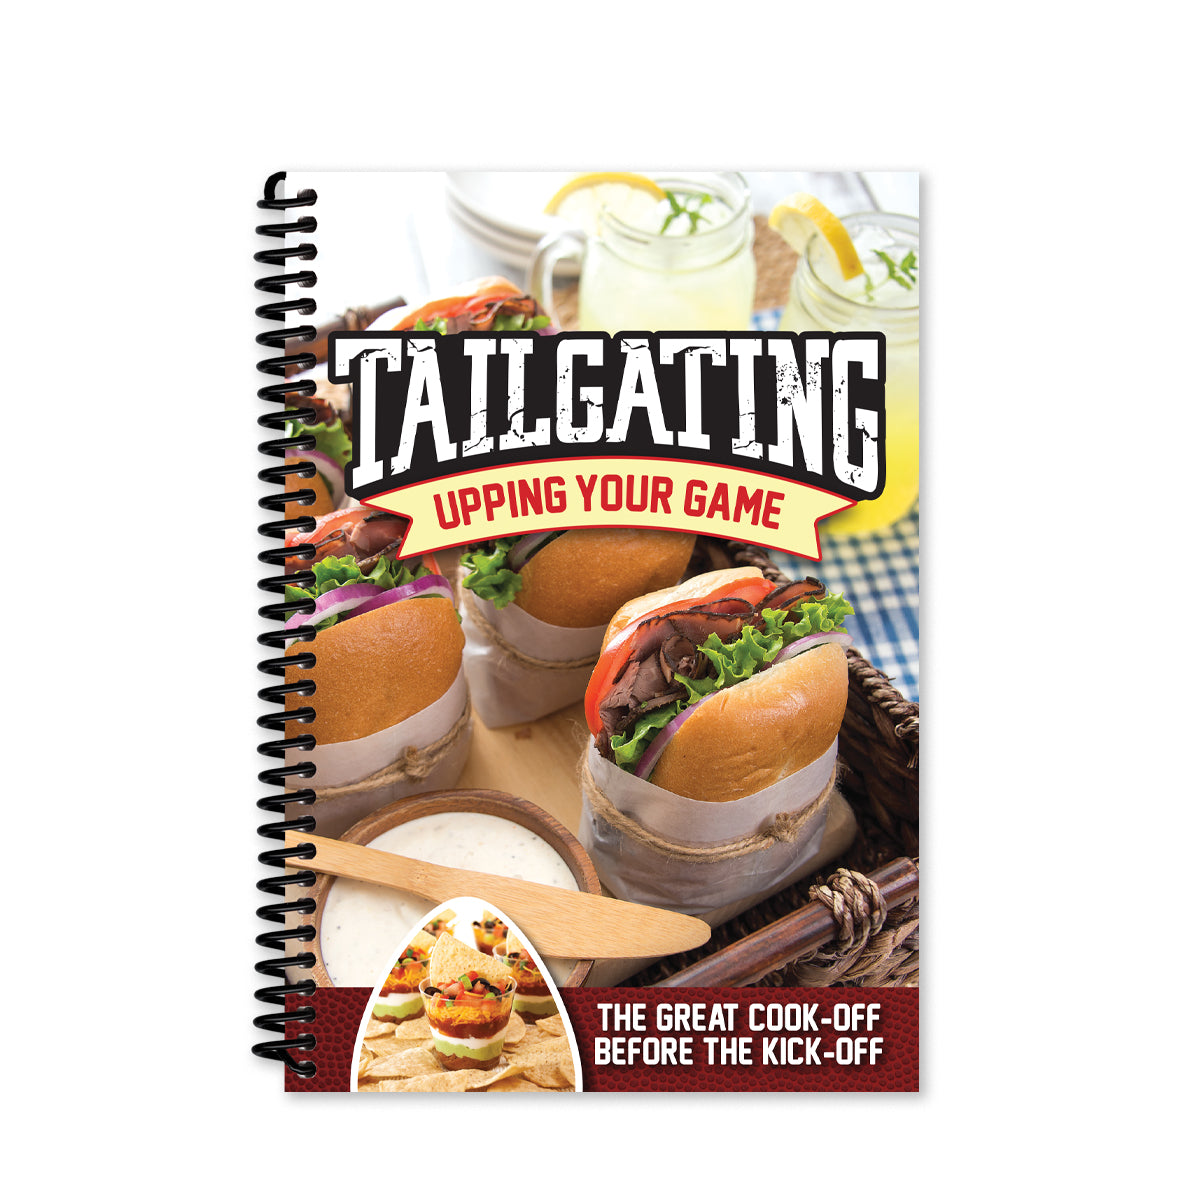 Cookbook called Tailgating: Upping Your Game